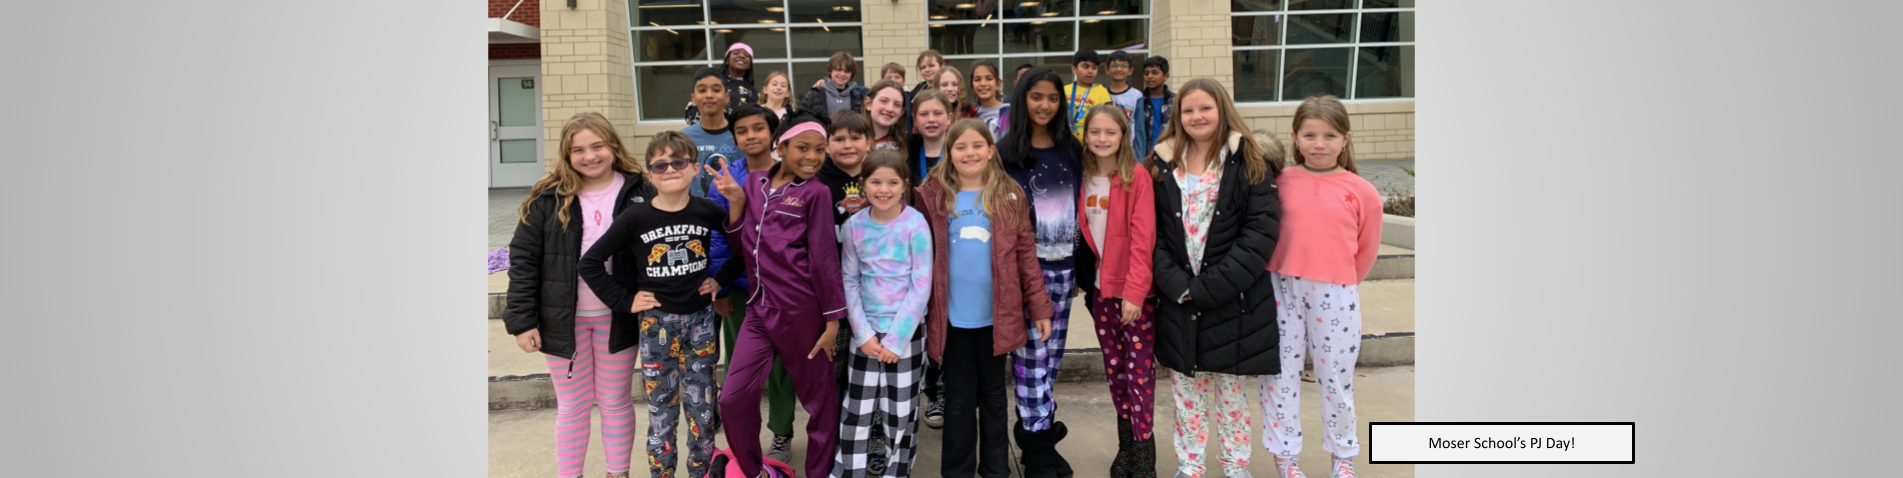 Group of students on PJ day